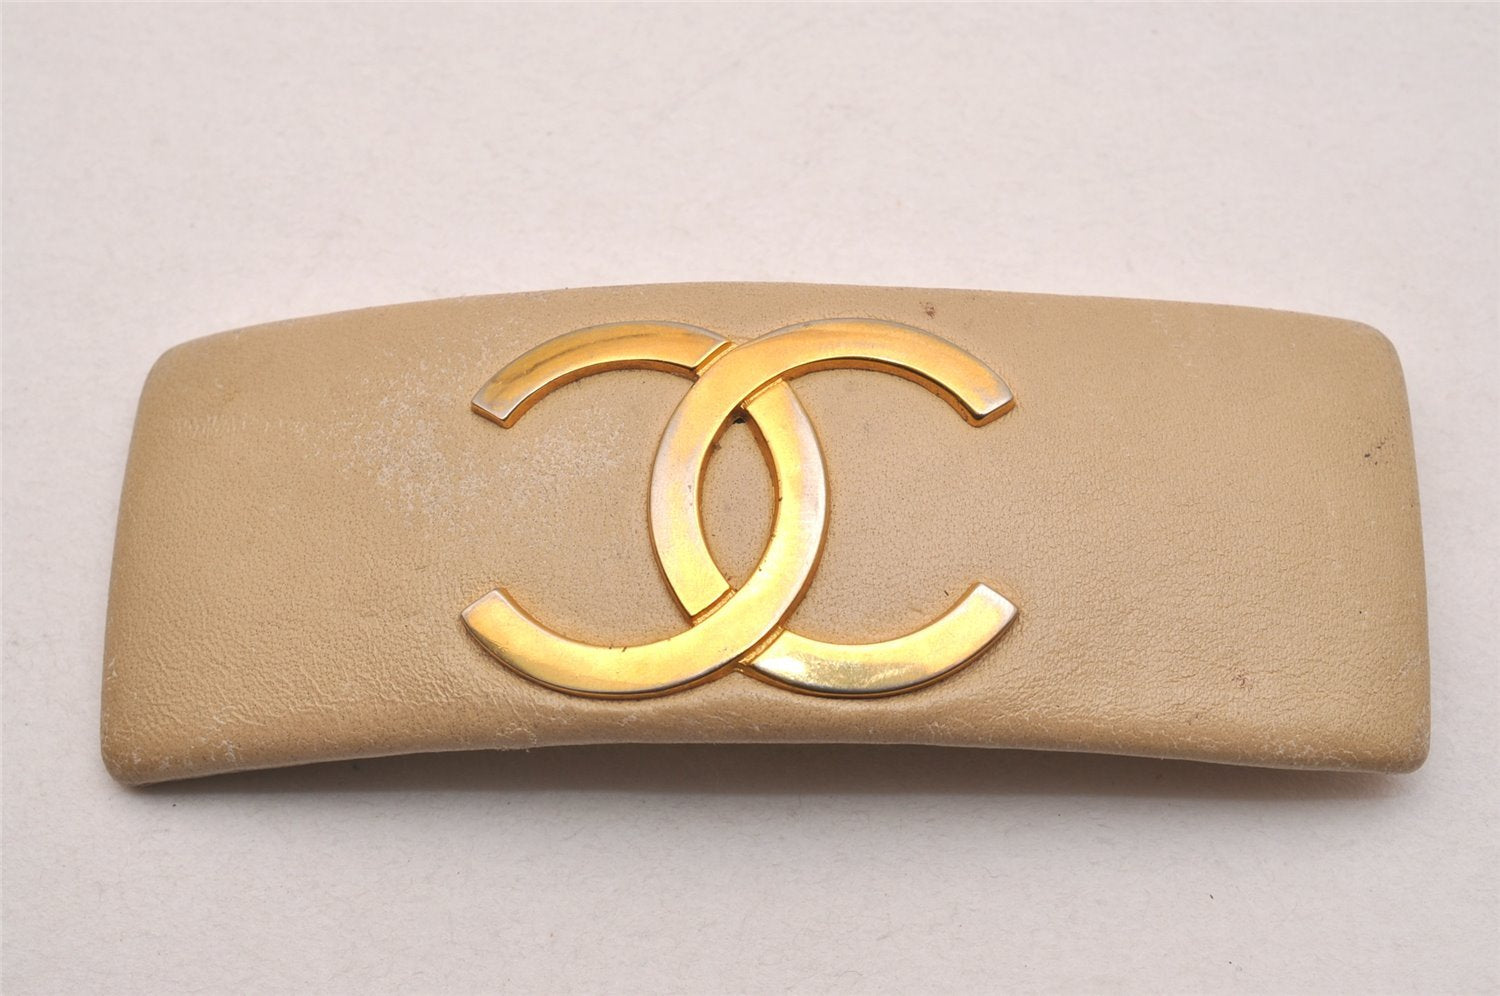 Authentic CHANEL Barrette Hair Accessory CoCo Mark Leather Beige 3709J